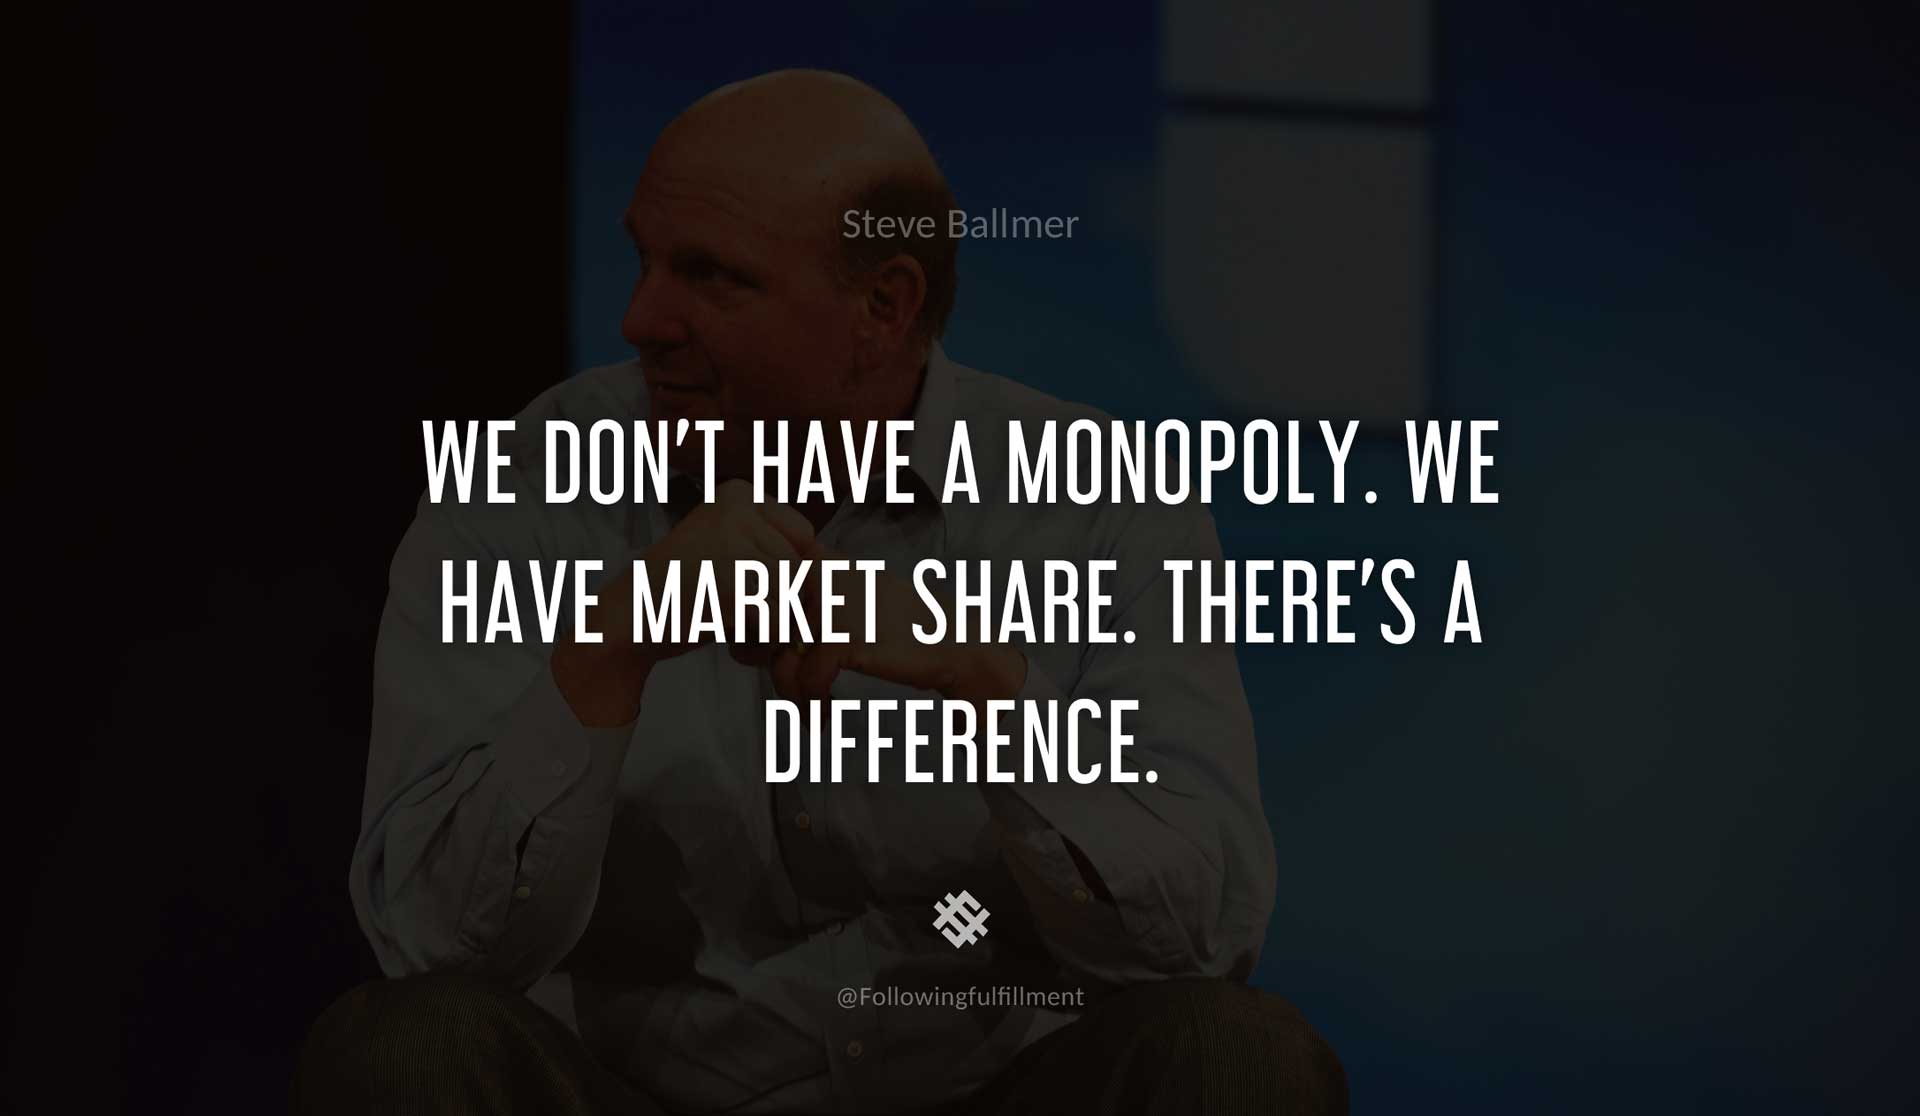 We-don't-have-a-monopoly.-We-have-market-share.-There's-a-difference.-STEVE-BALLMER-Quote.jpg